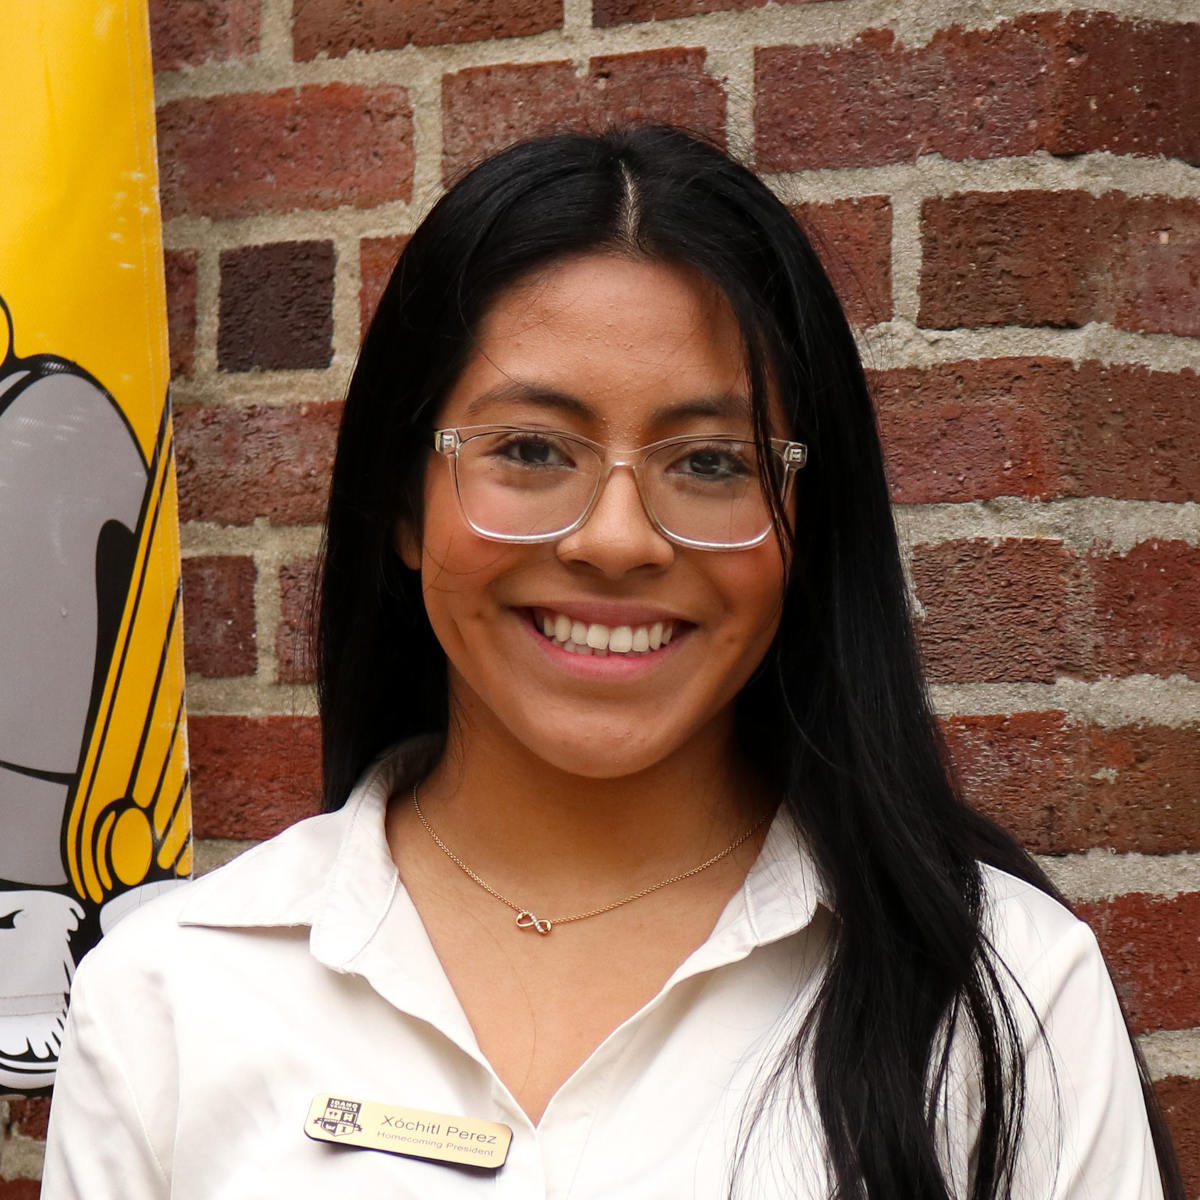 Xochitl Perez smiles outdoors on campus, a brick building in the background with a banner featuring an illustration of Joe Vandal.